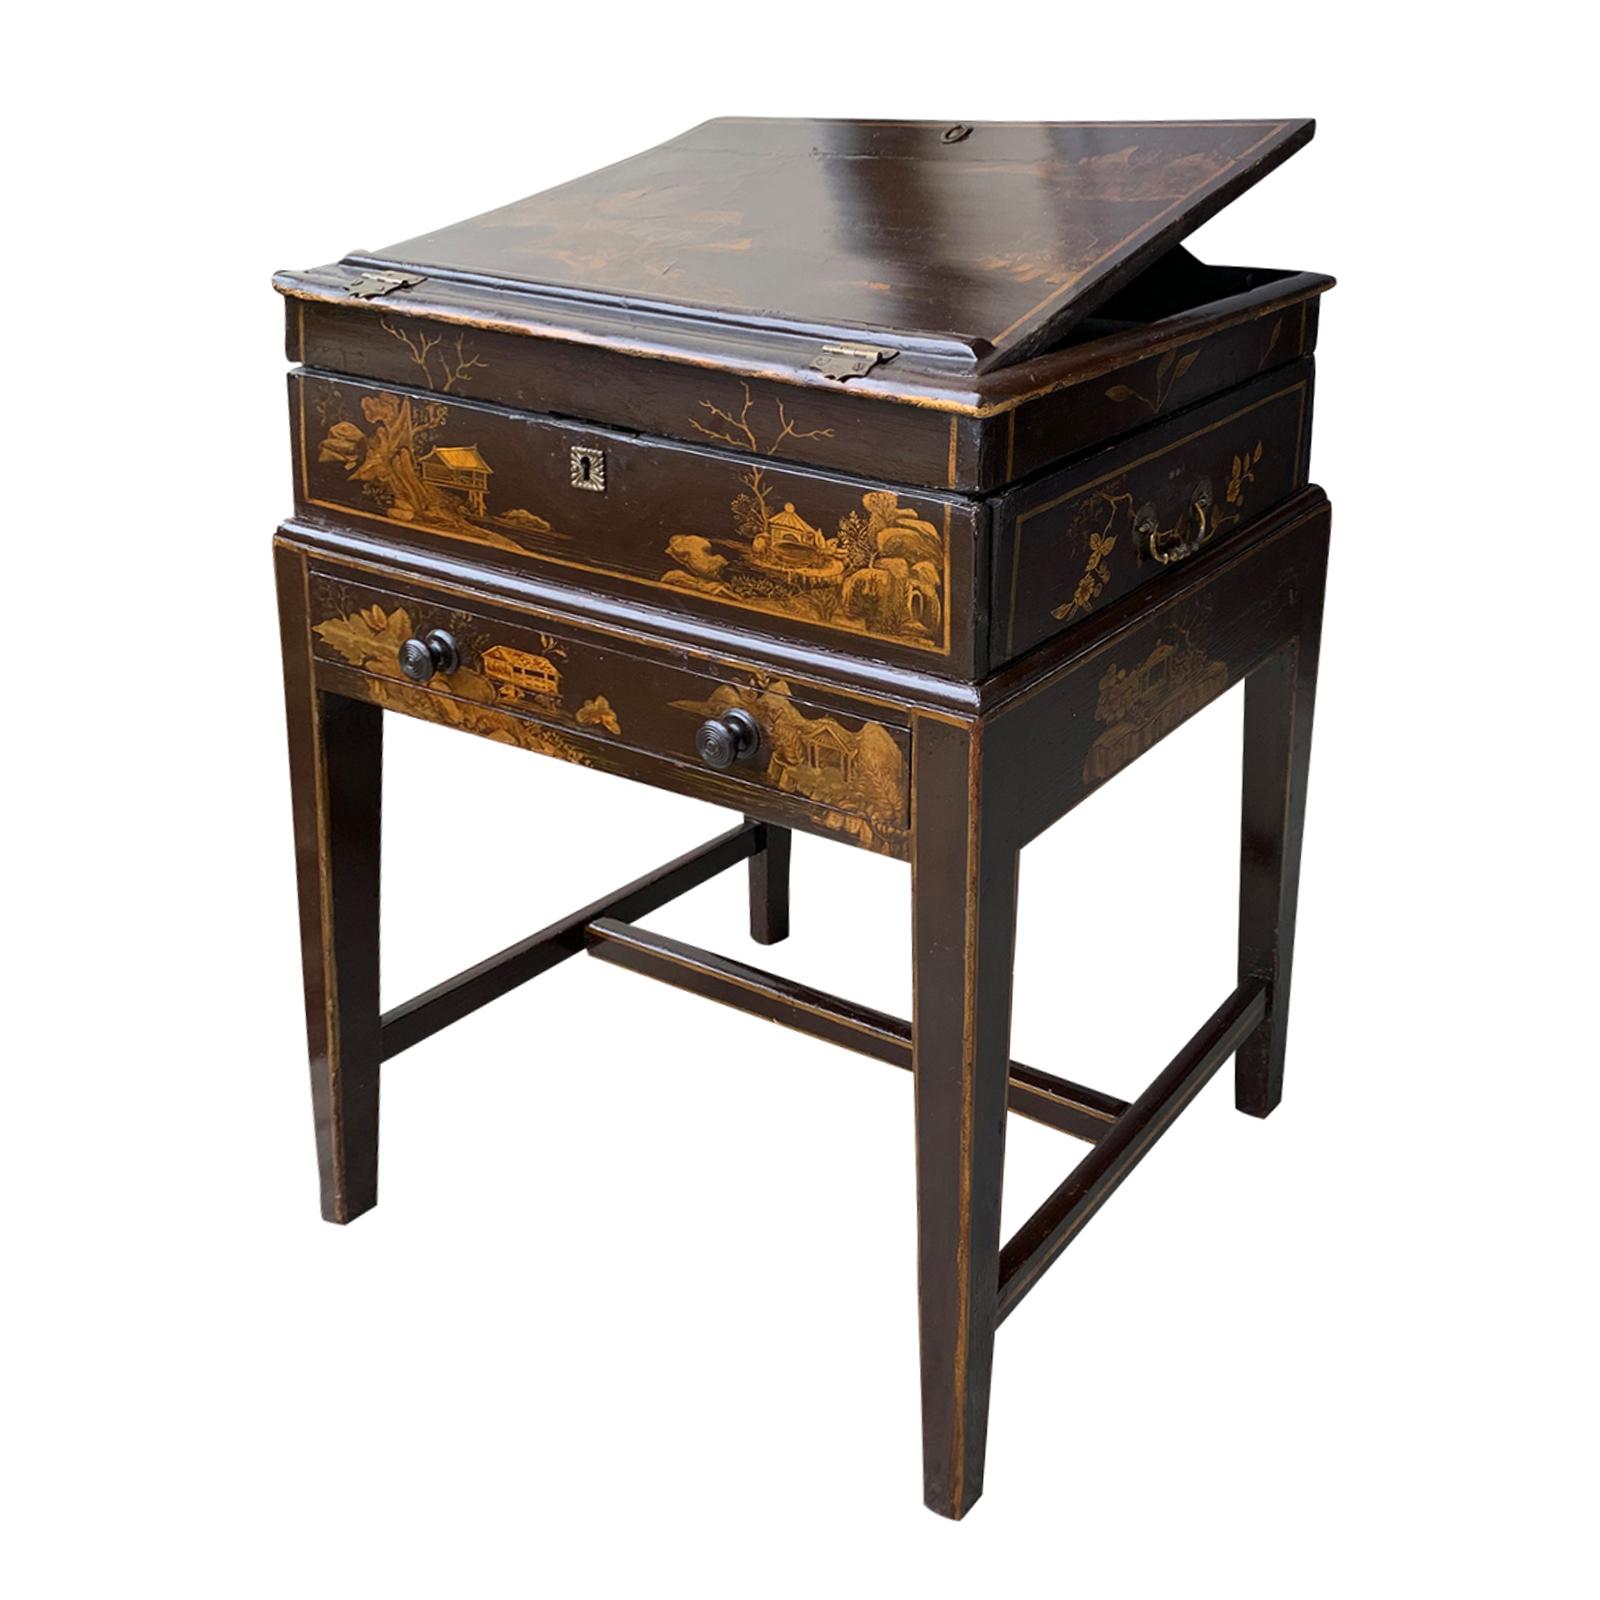 Chinoiserie Lacquered Writing Box on Stand